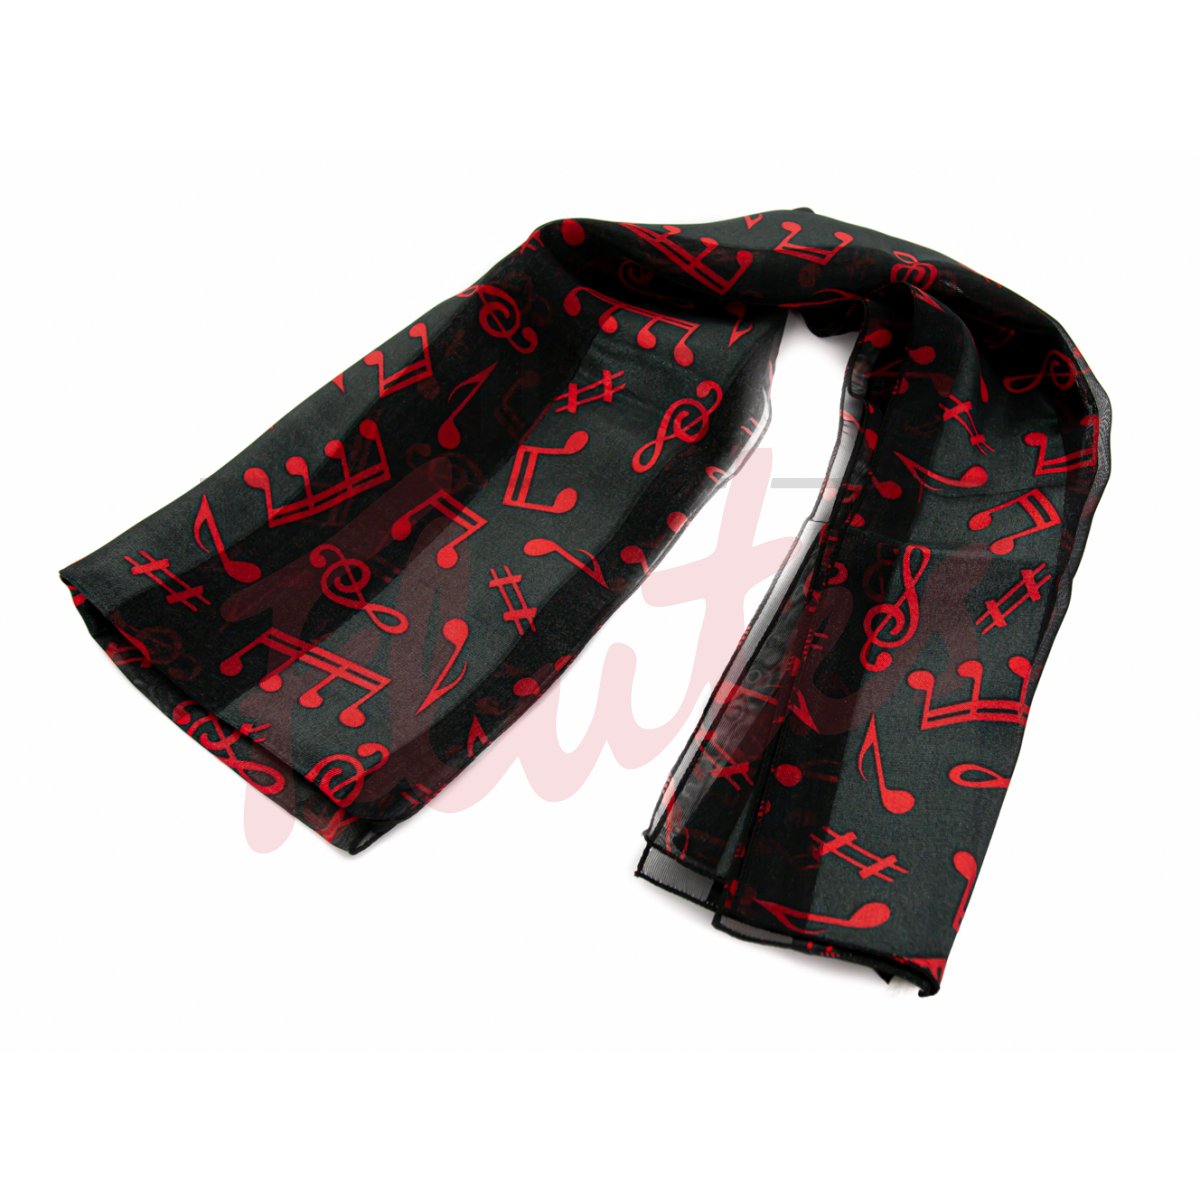 Music Scarf, Large Notes on Satin Stripes, Black with Red Notes